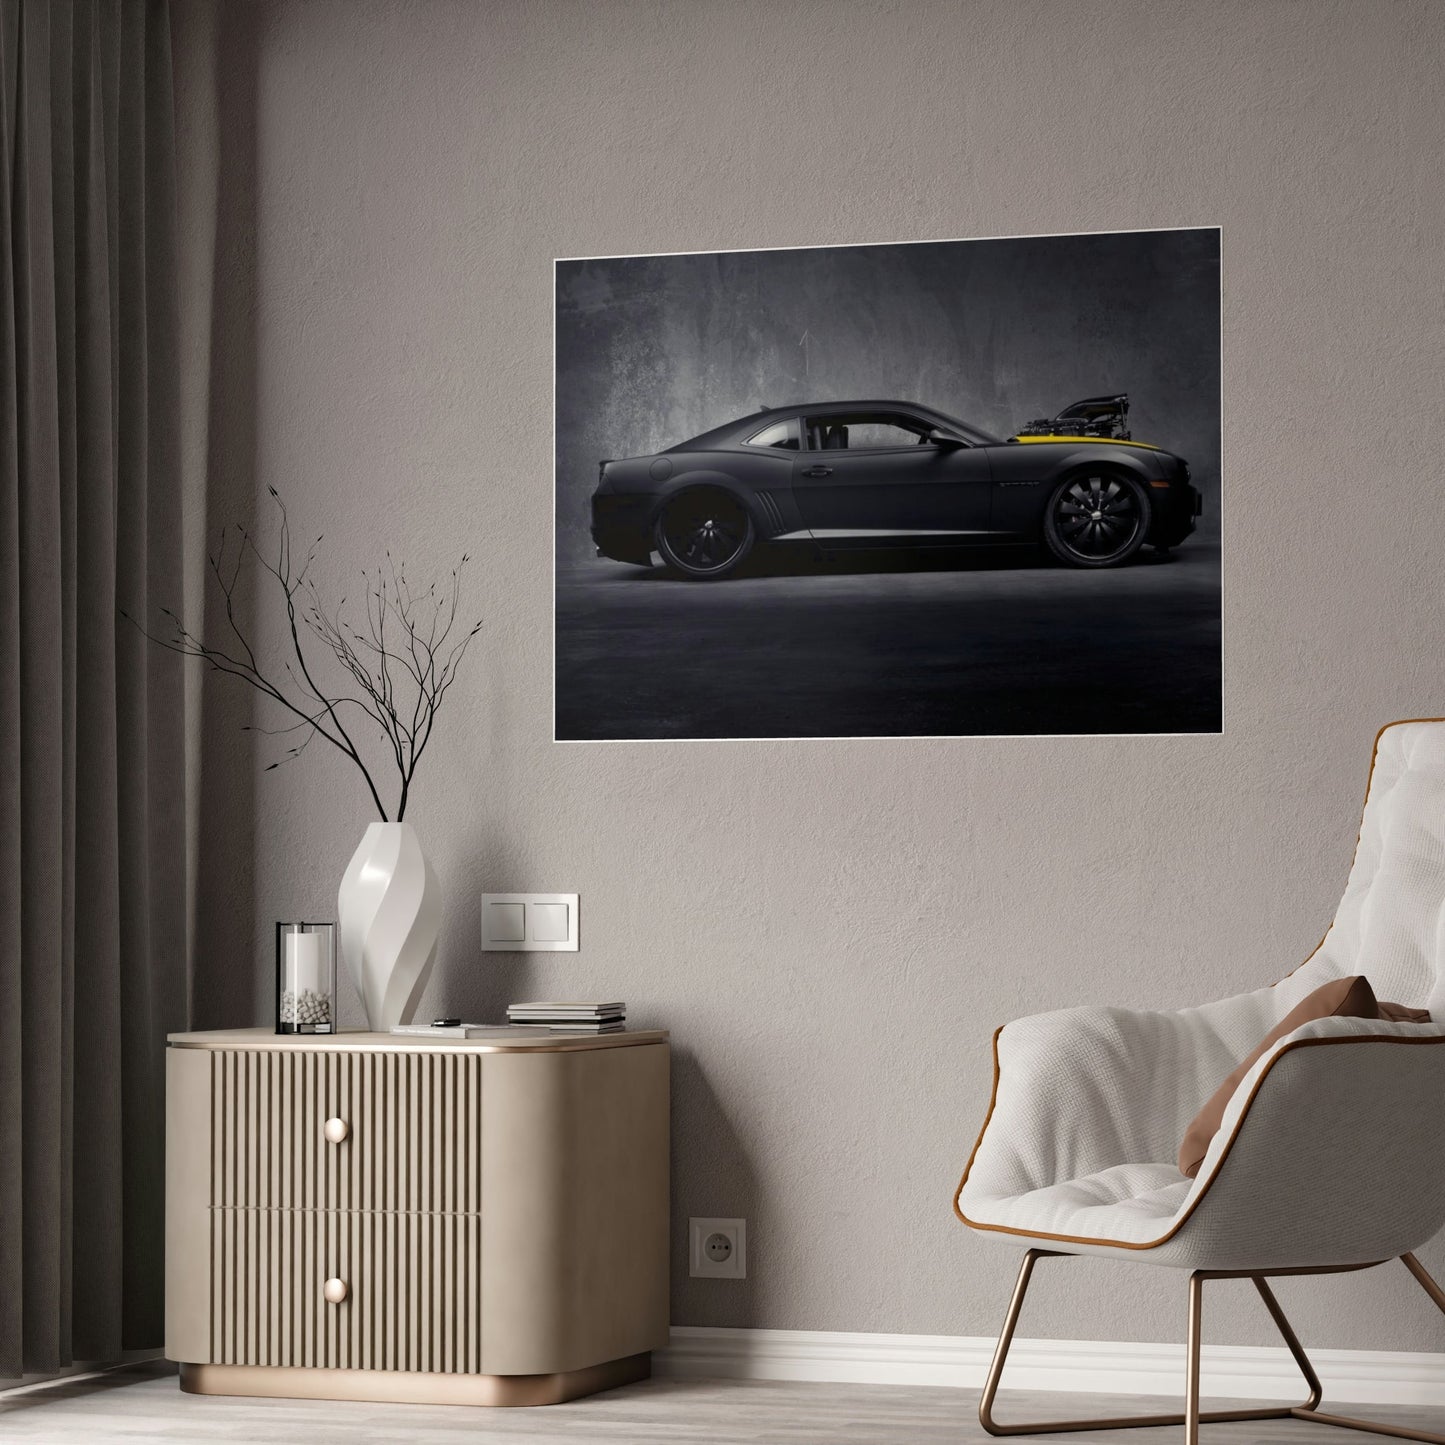 Chevrolet: Print on Canvas with Classic Chevrolet Images and Logos